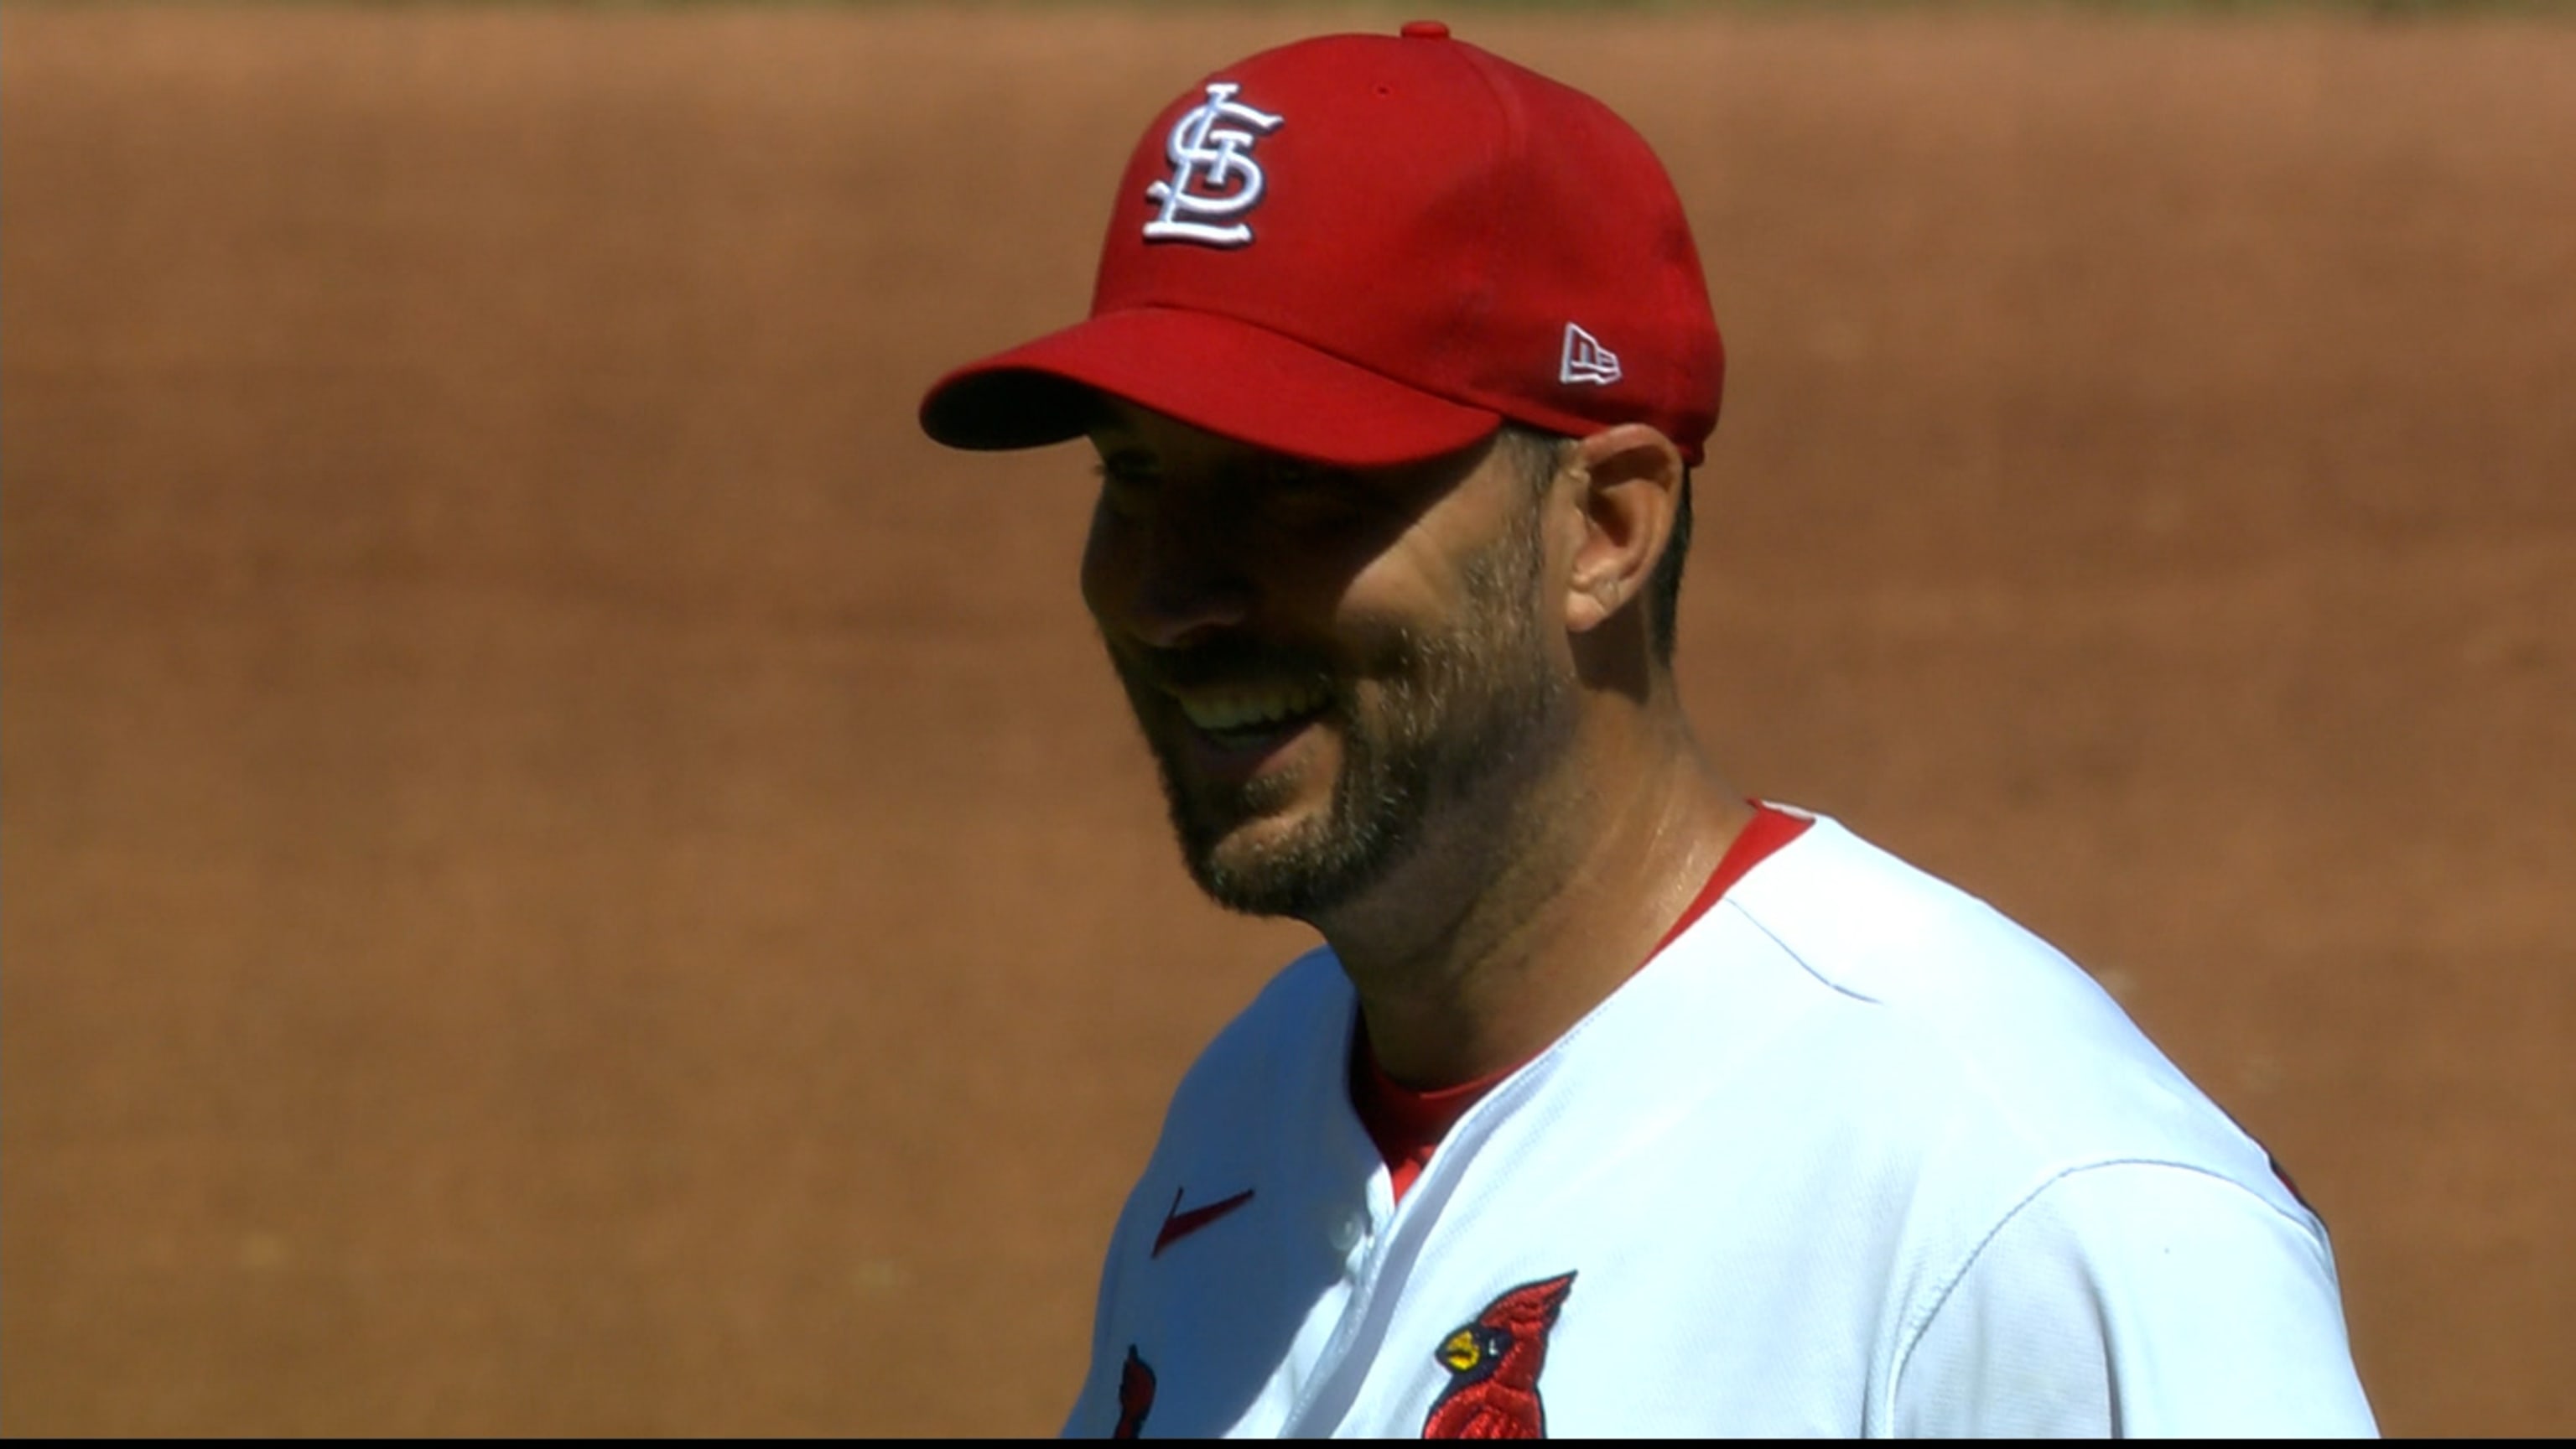 317 starts later, it's just like riding a bike for Waino and Yadi